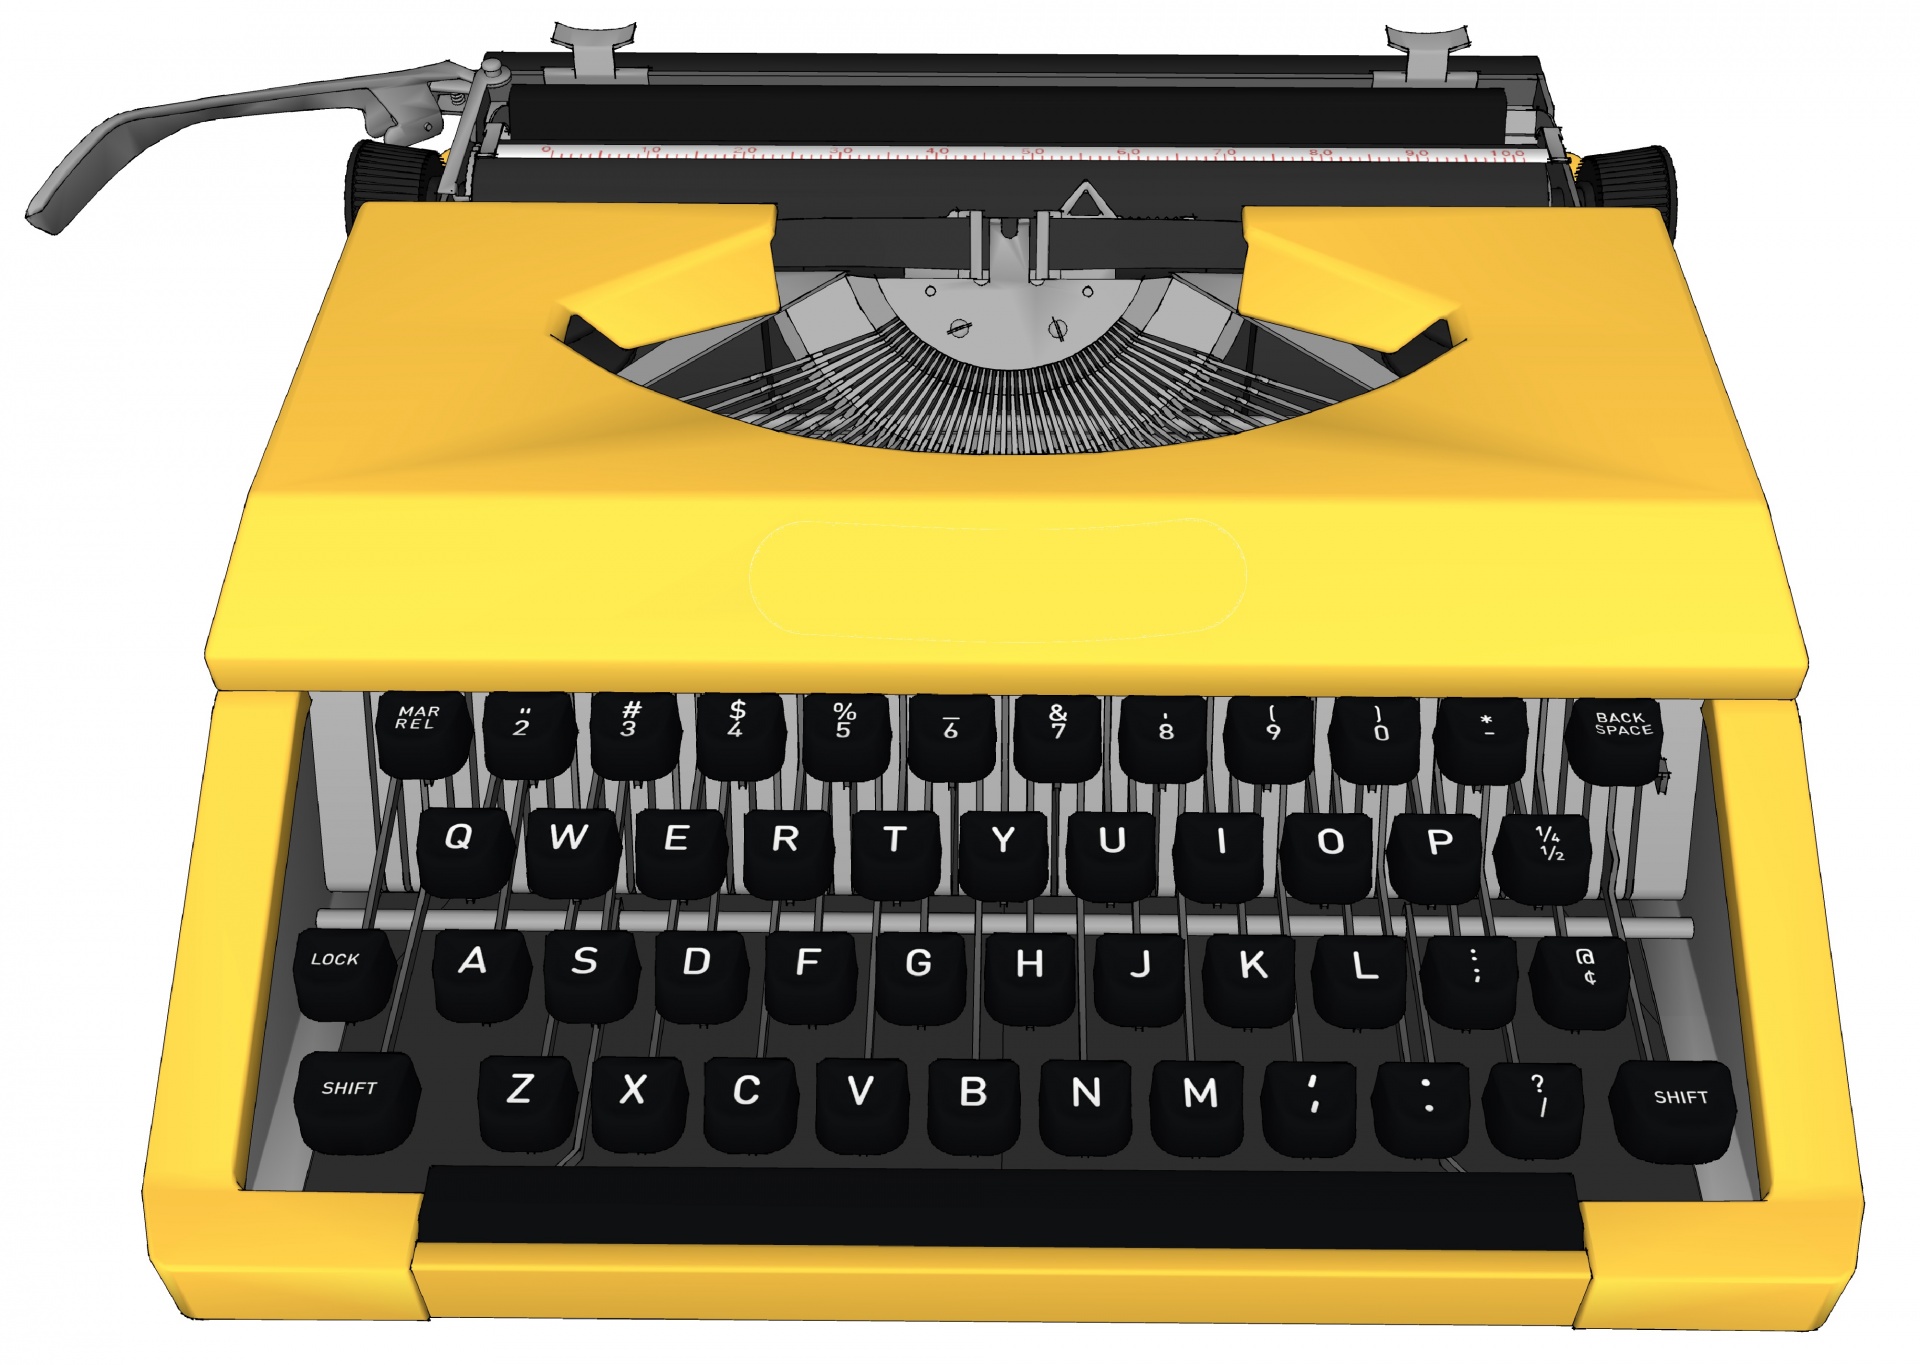 3d drawing of a yellow typewriter on white